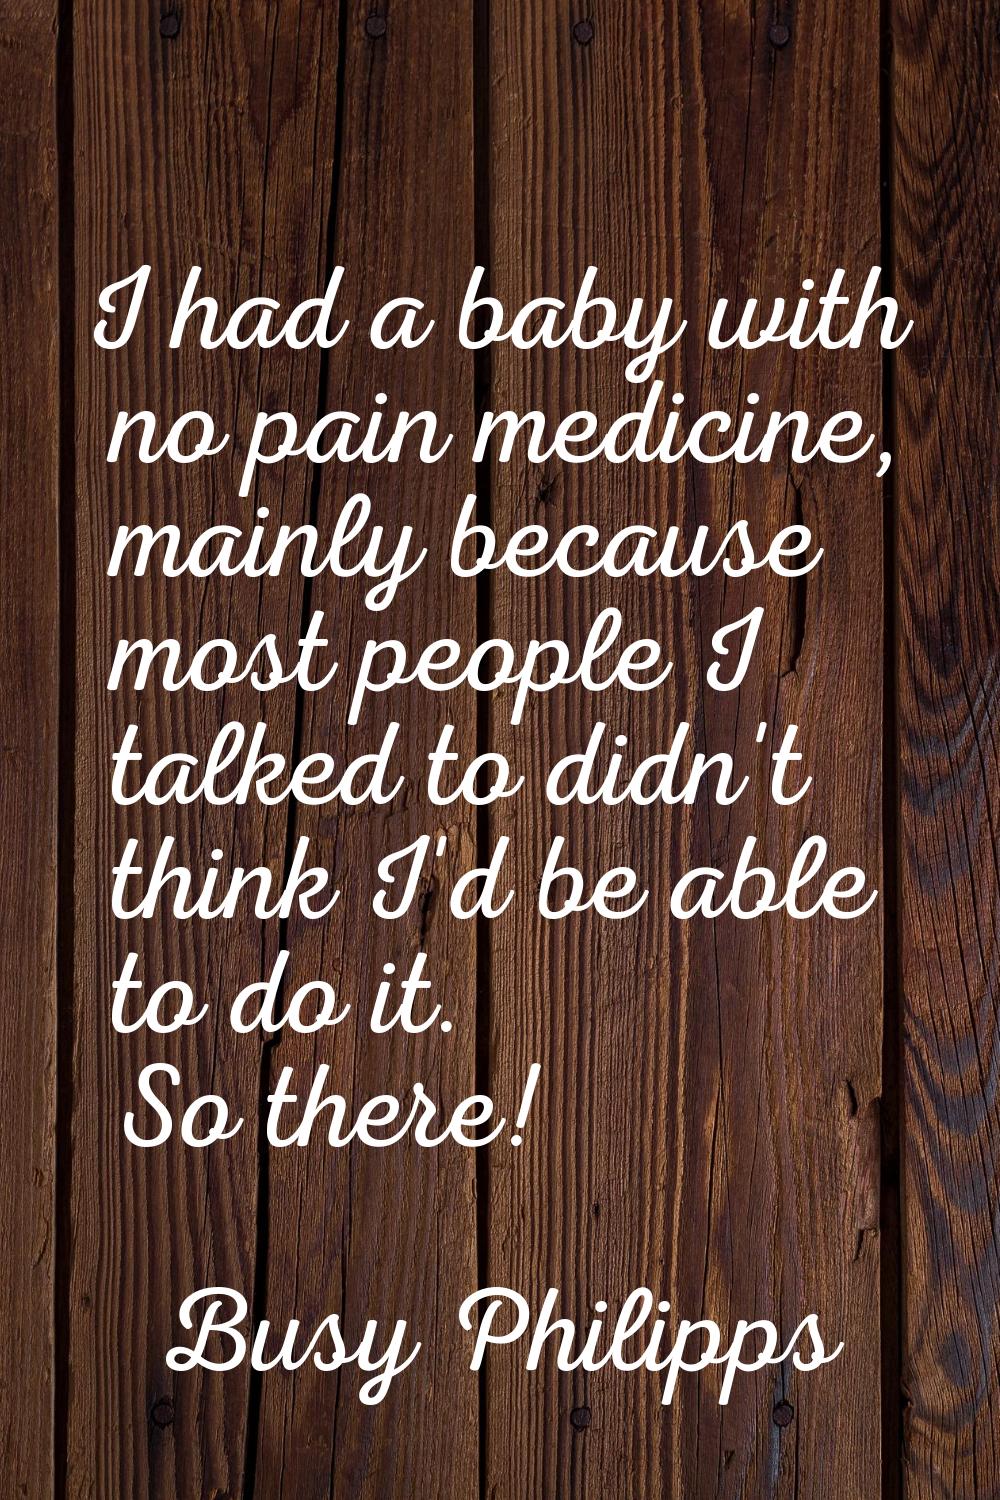 I had a baby with no pain medicine, mainly because most people I talked to didn't think I'd be able